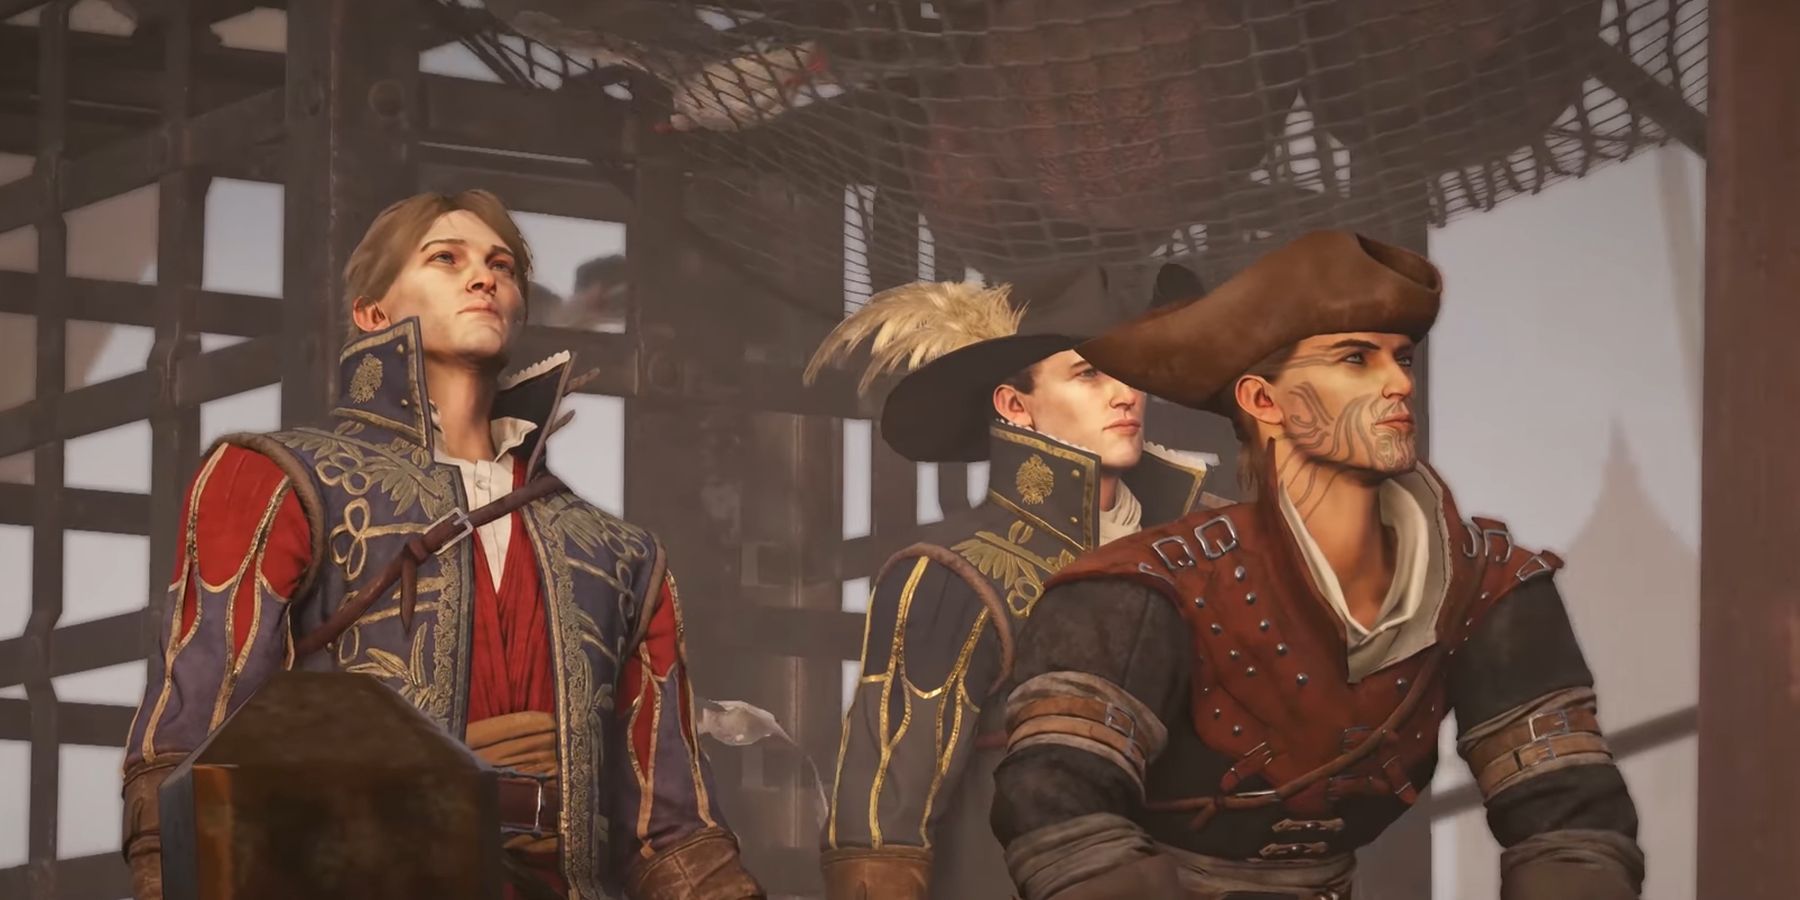 greedfall constantin and co on ship looking outward